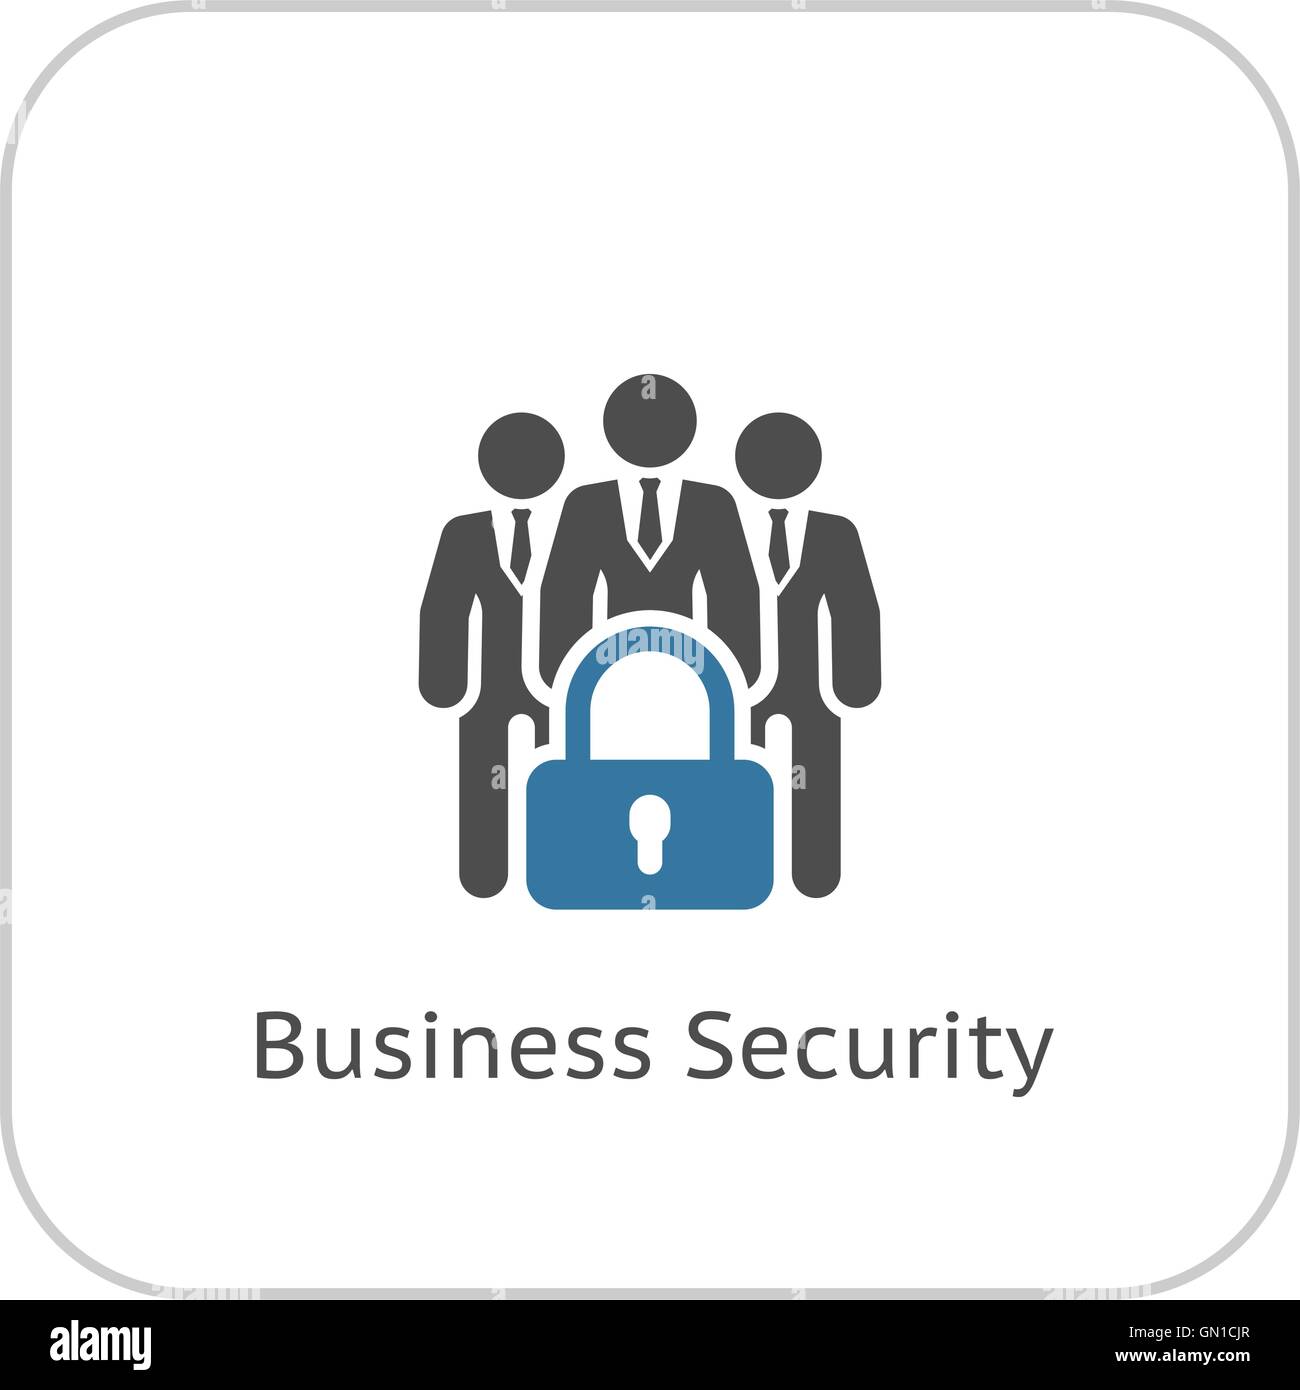 Business Security Icon. Flat Design. Stock Vector